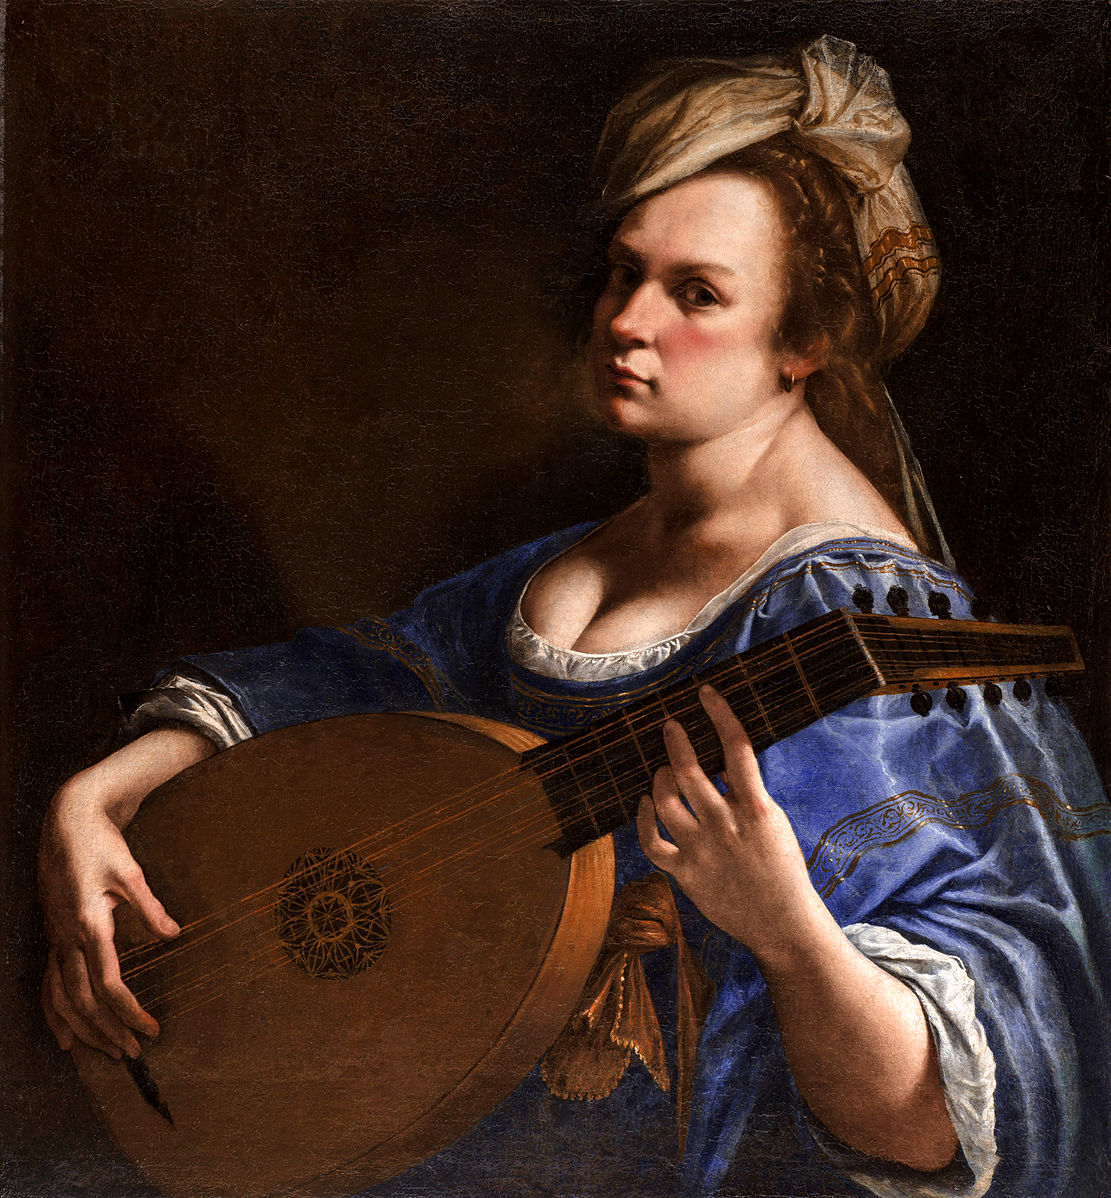 Self-portrait of the artist in a blue dress playing the lute